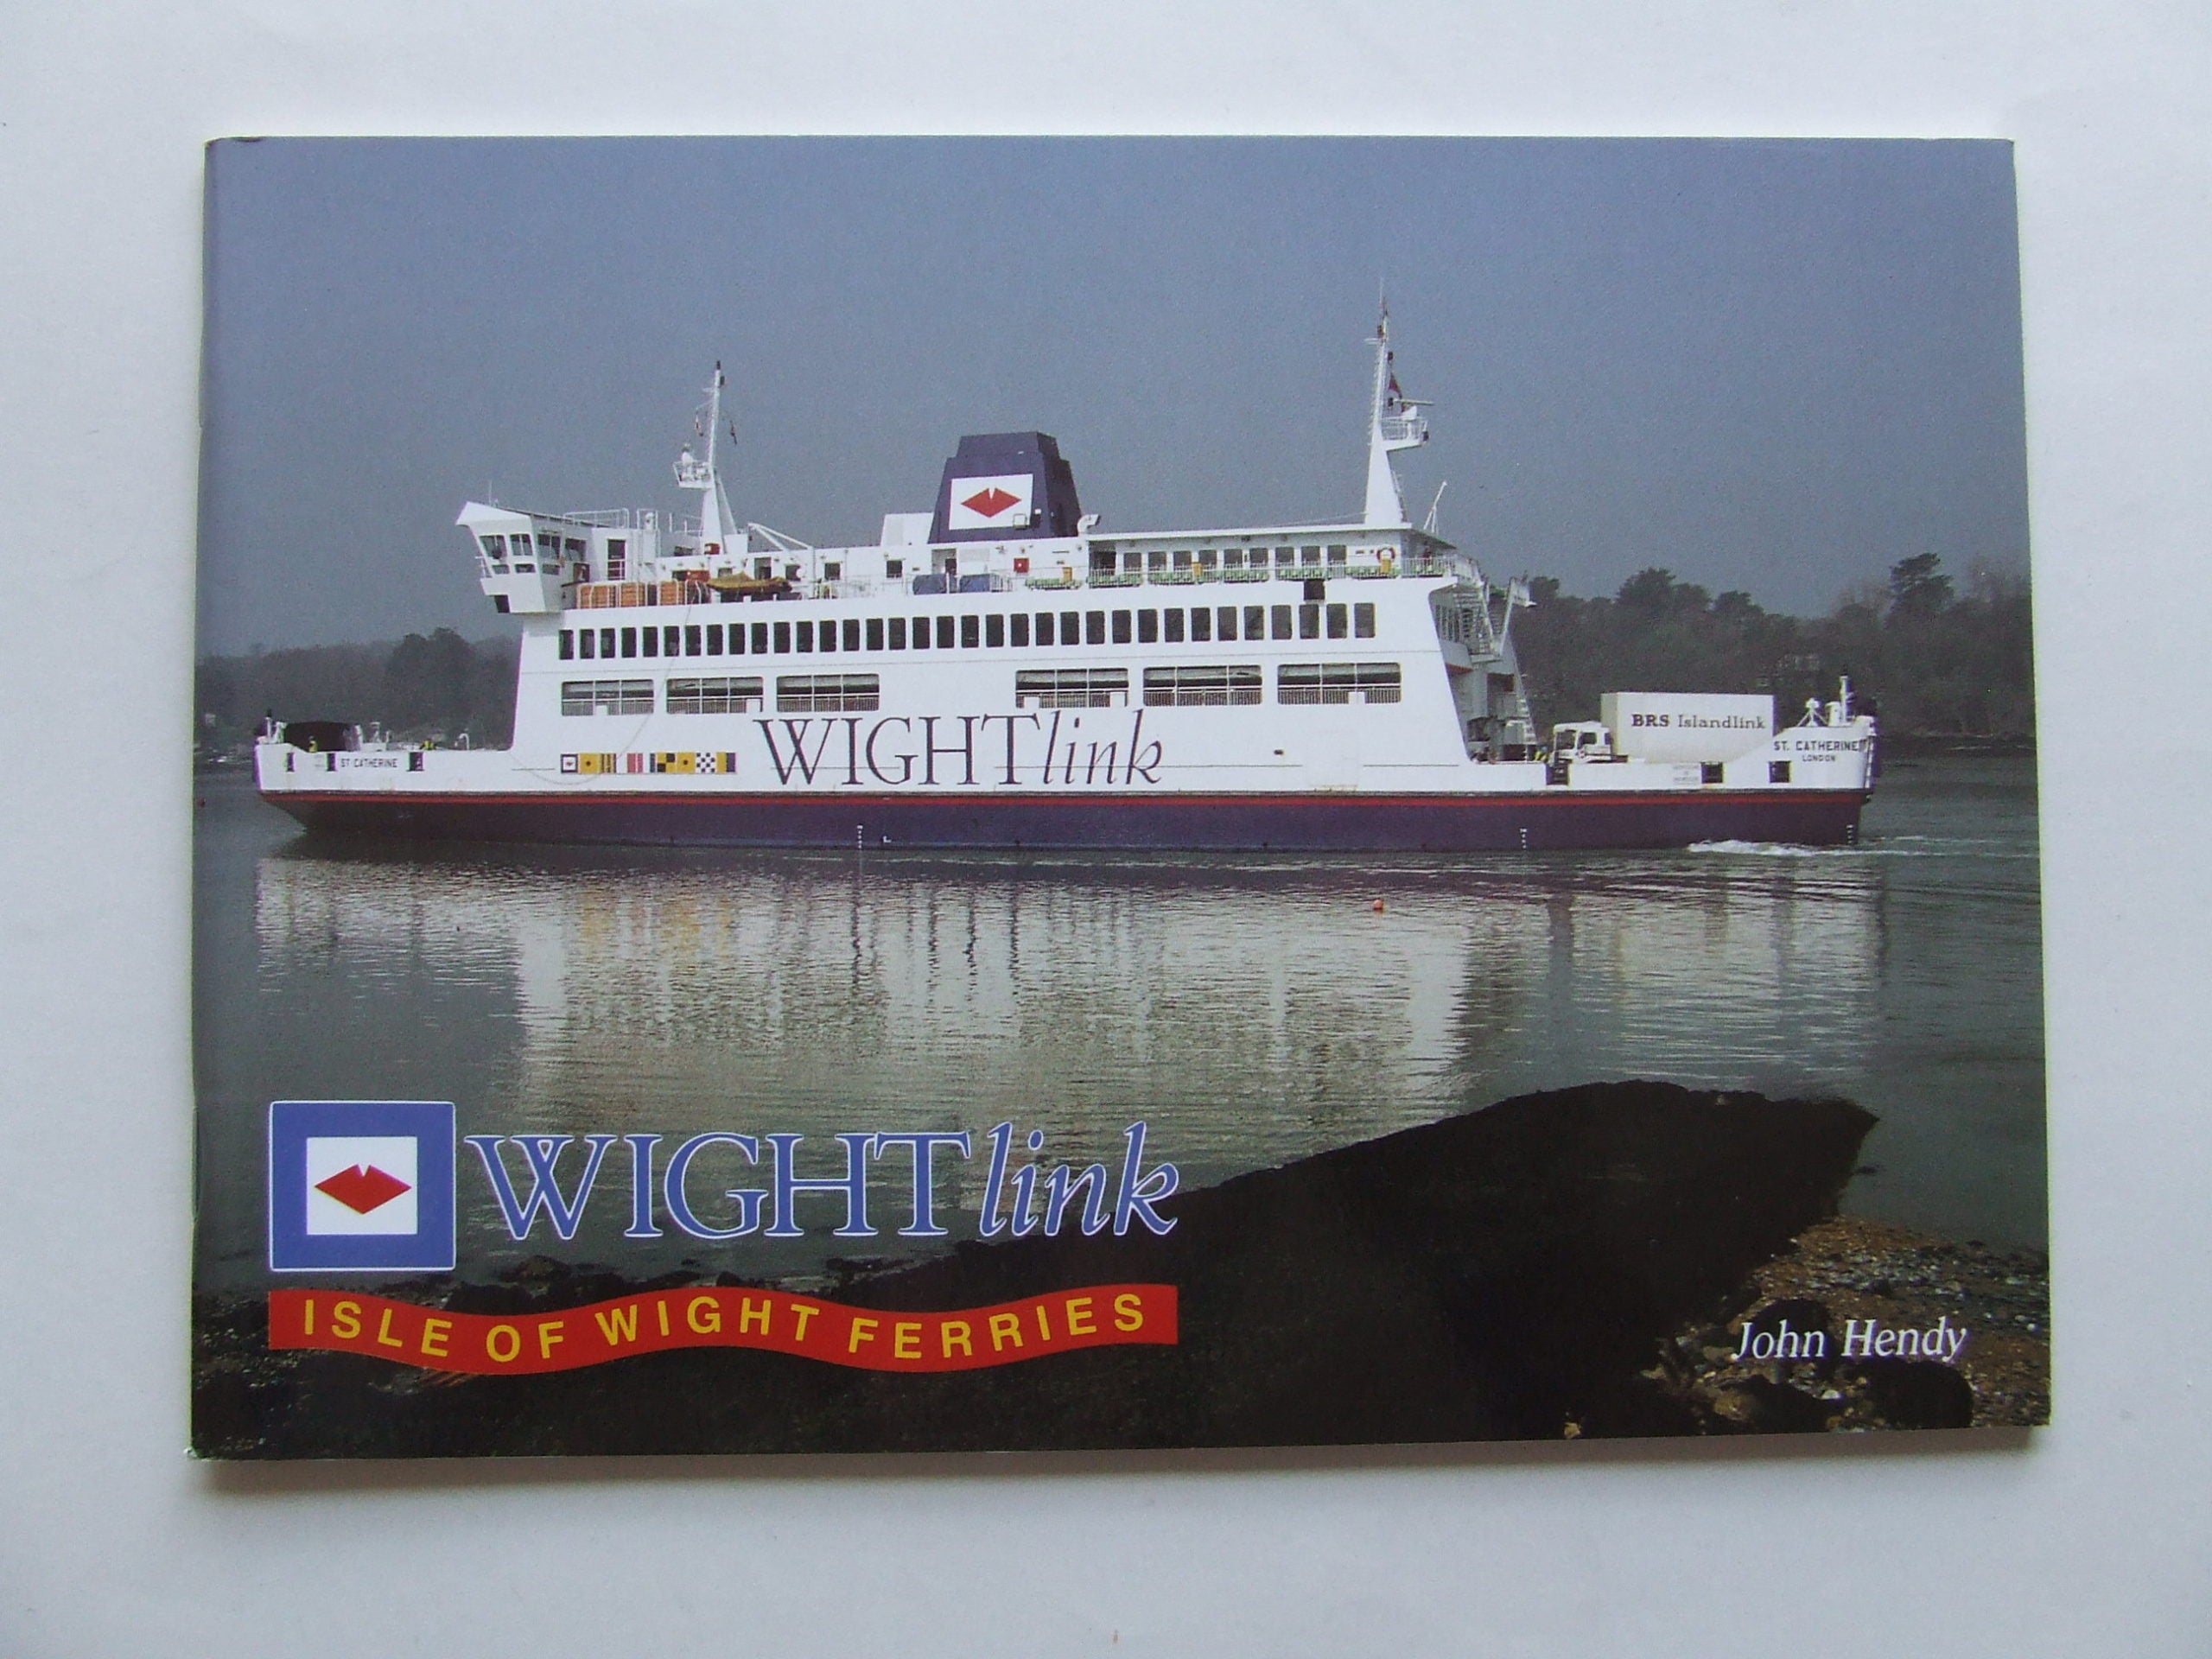 Wight Link, Isle of Wight Ferries